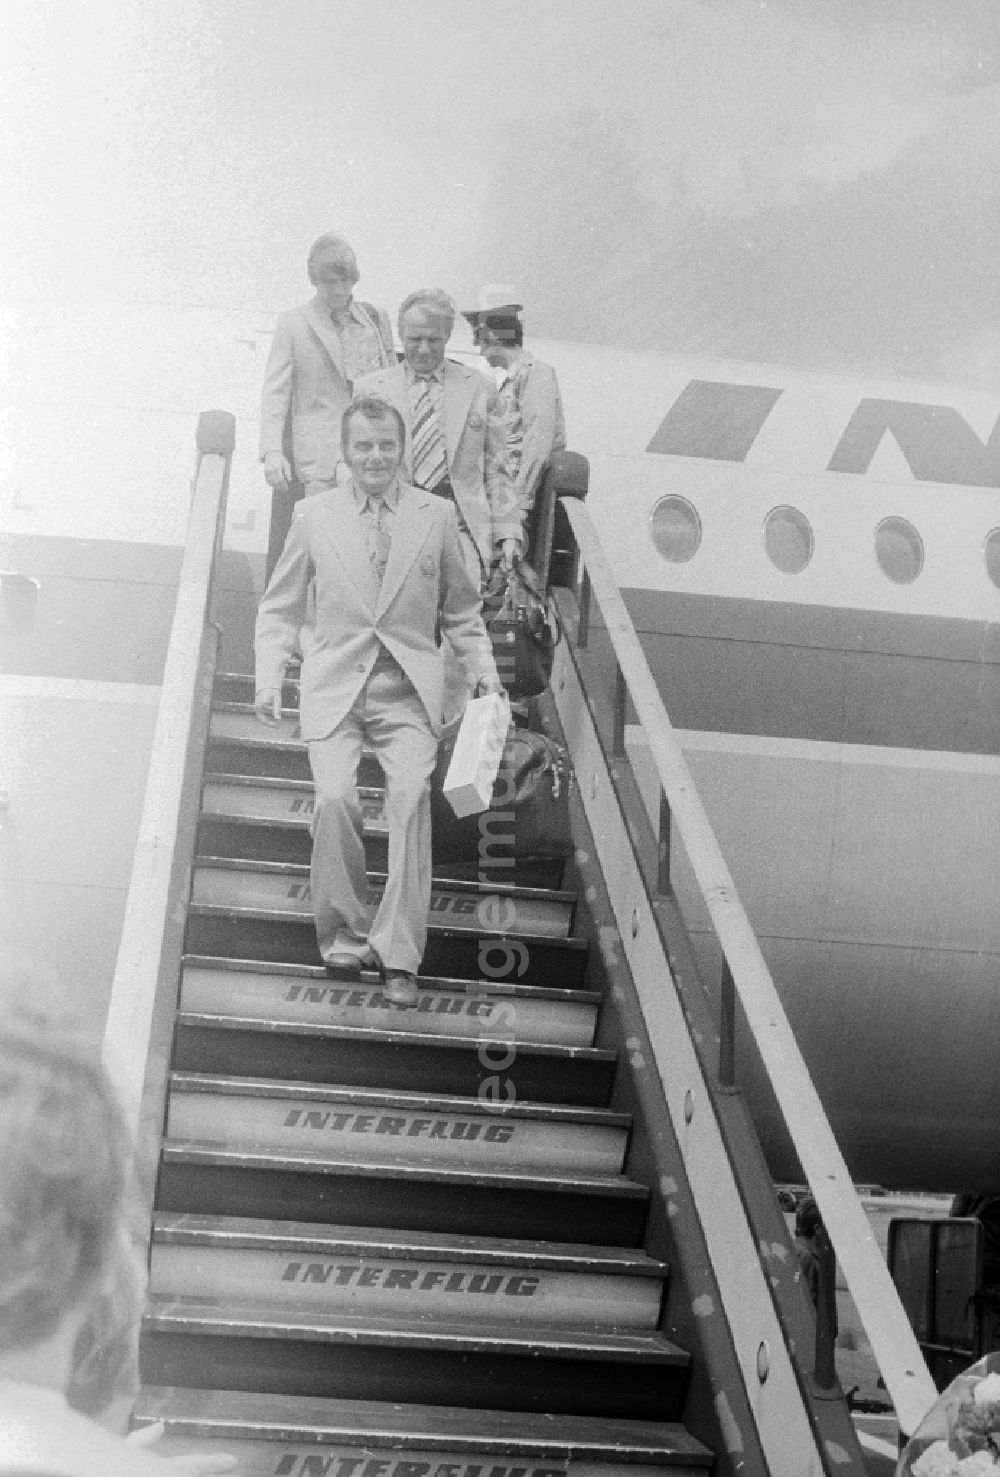 GDR image archive: Schönefeld - Arrival of the GDR-Olympic team on the area of the airport beauty's field in beauty's field in the federal state Brandenburg in the area of the former GDR, German democratic republic. The GDR took part in the Summer Olympics in 1976 in Montreal with a delegation of more than 28